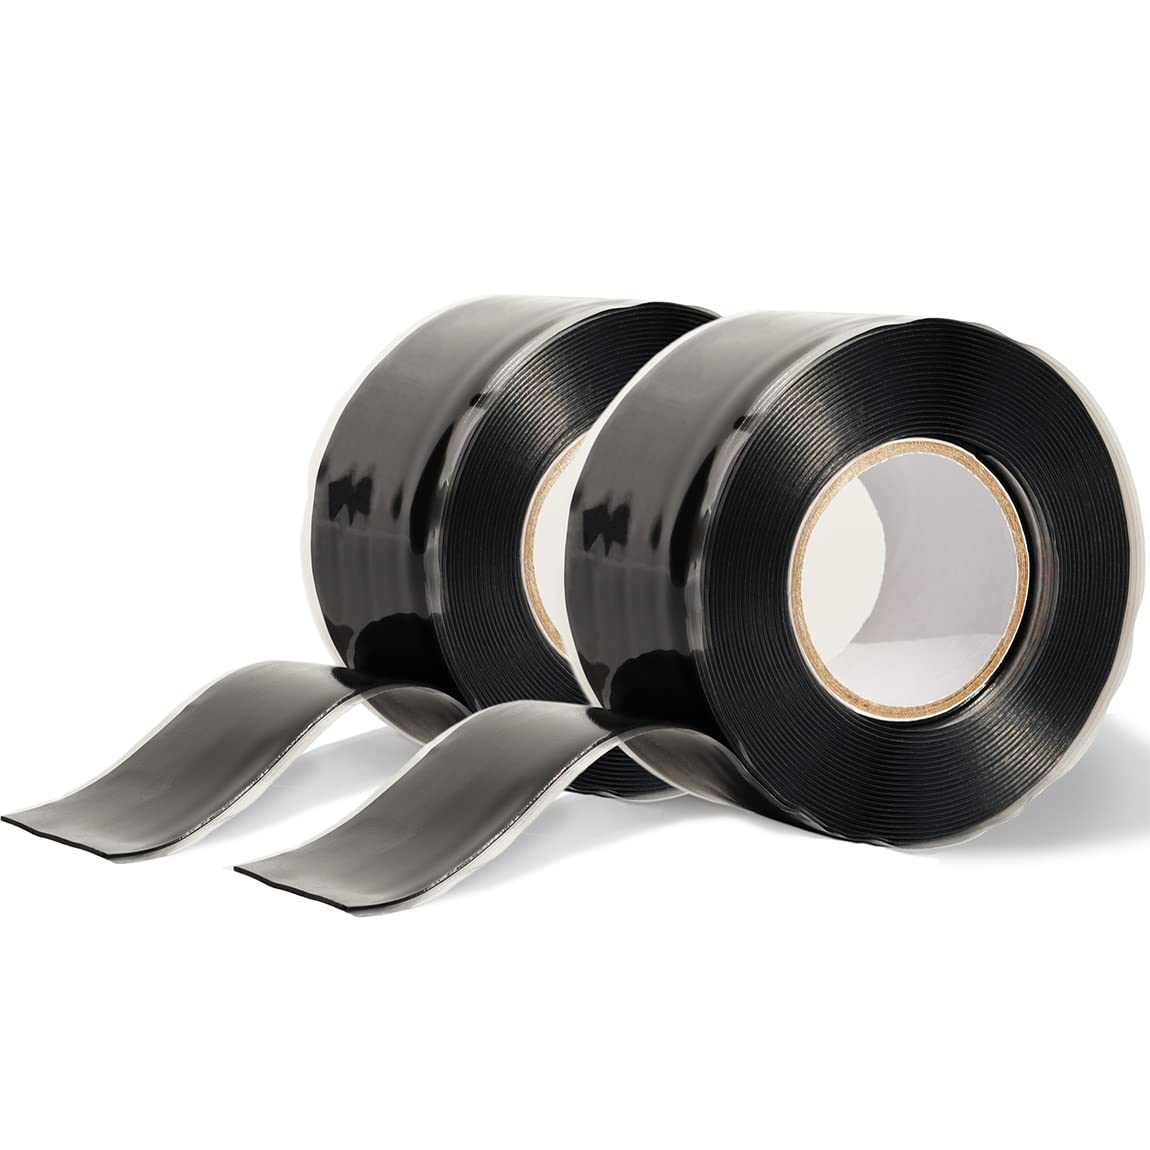 waterproof tape for leaking pipes detailed review